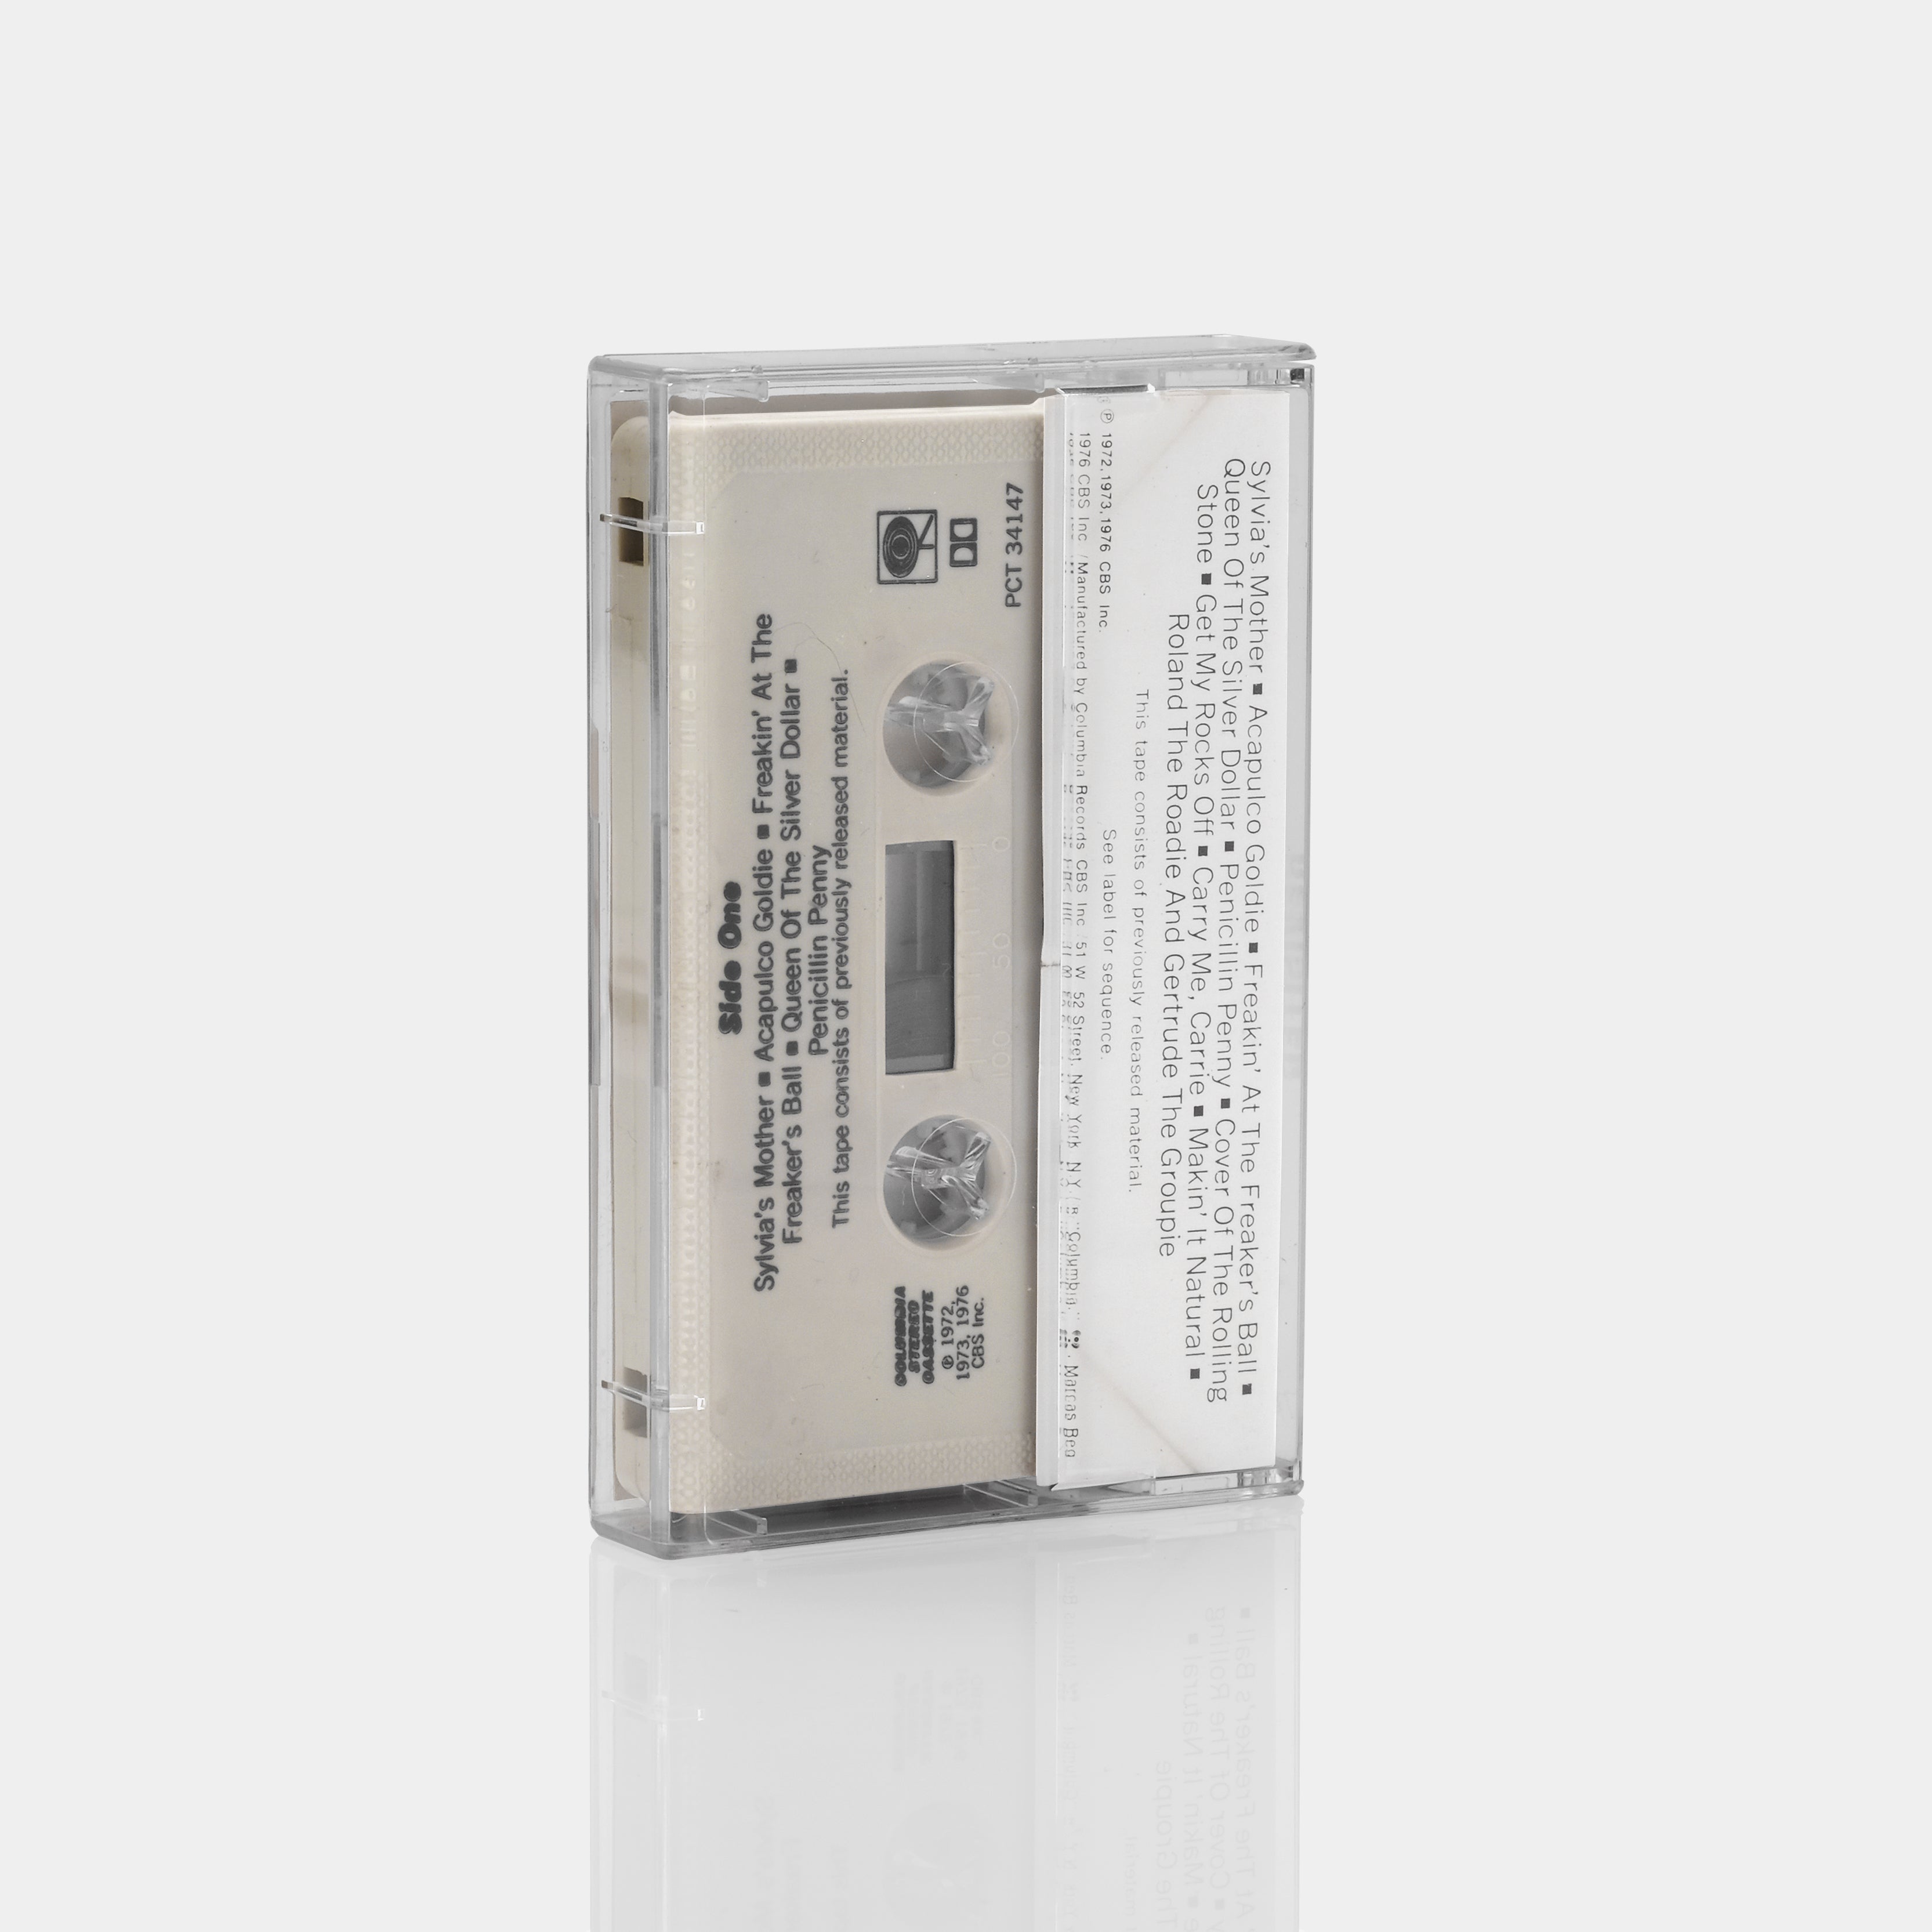 Dr. Hook And The Medicine Show - Revisited Cassette Tape